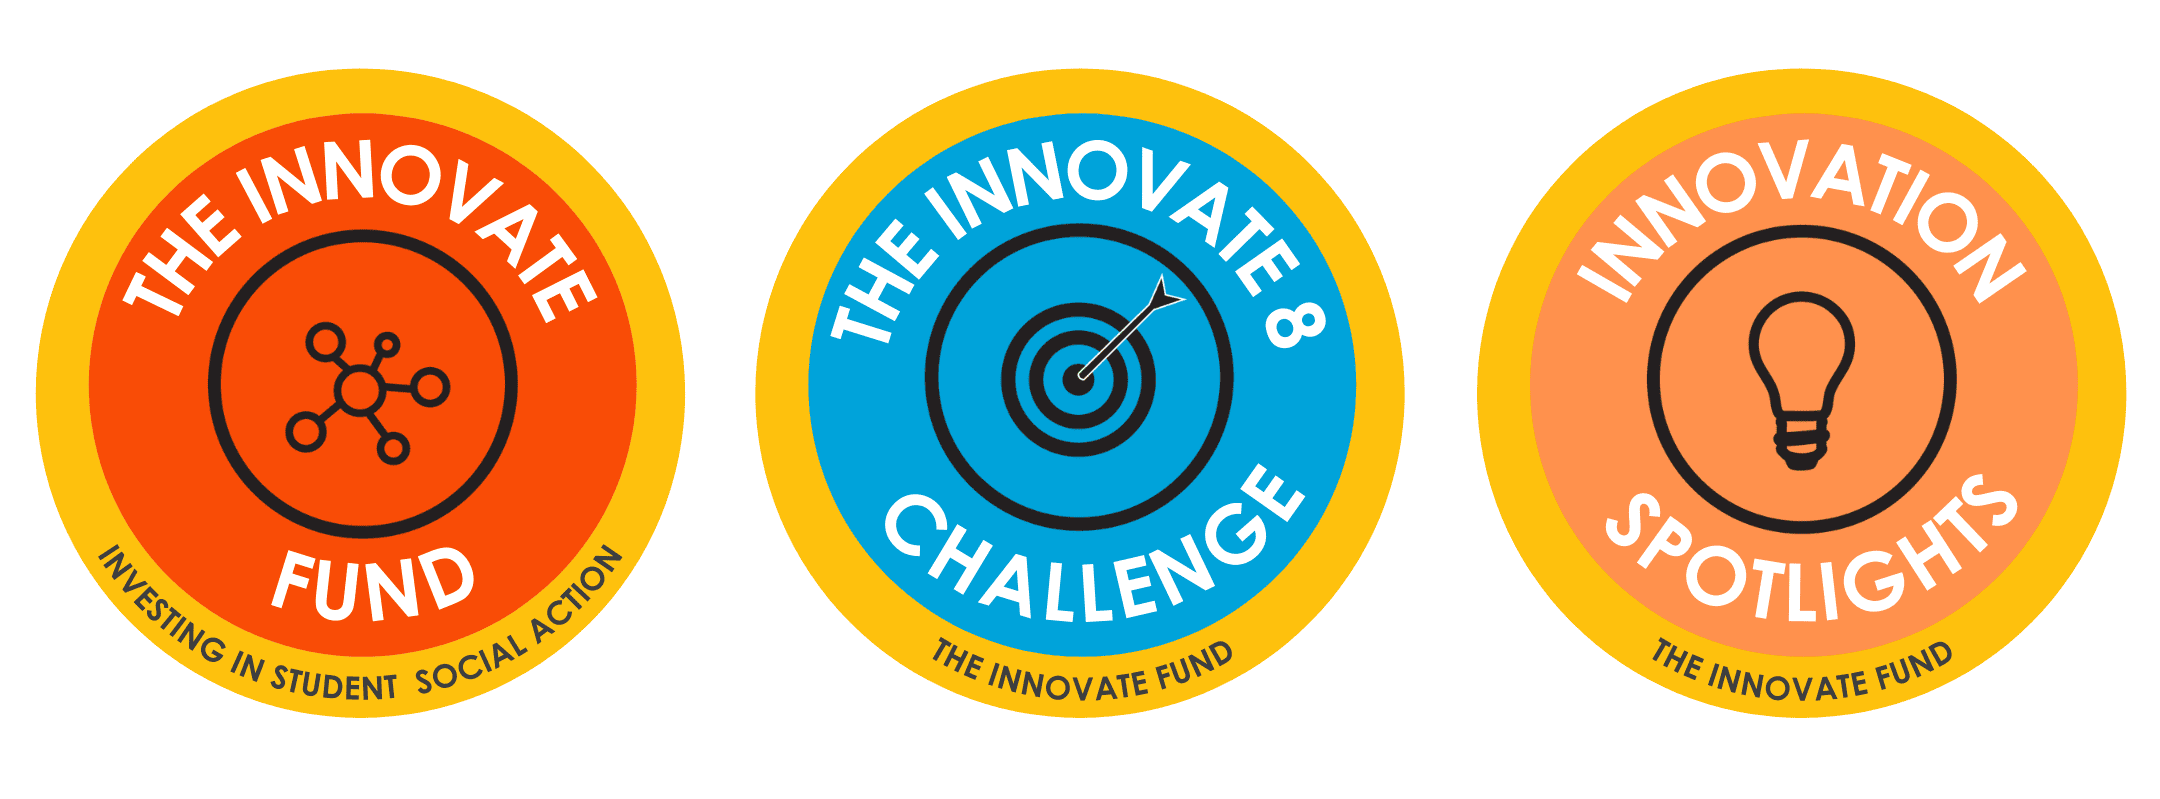 Three logos side by side to represent the three different areas of the Student Hubs Spring Fundraiser. One is a orange circle with the text 'the innovate fund, investing in student social action' the second is a blue circle with the text 'the innovate8 challenge, the innovate fund' and the last is a light orange circle with the text 'innovation spotlight, the innovate fund'.